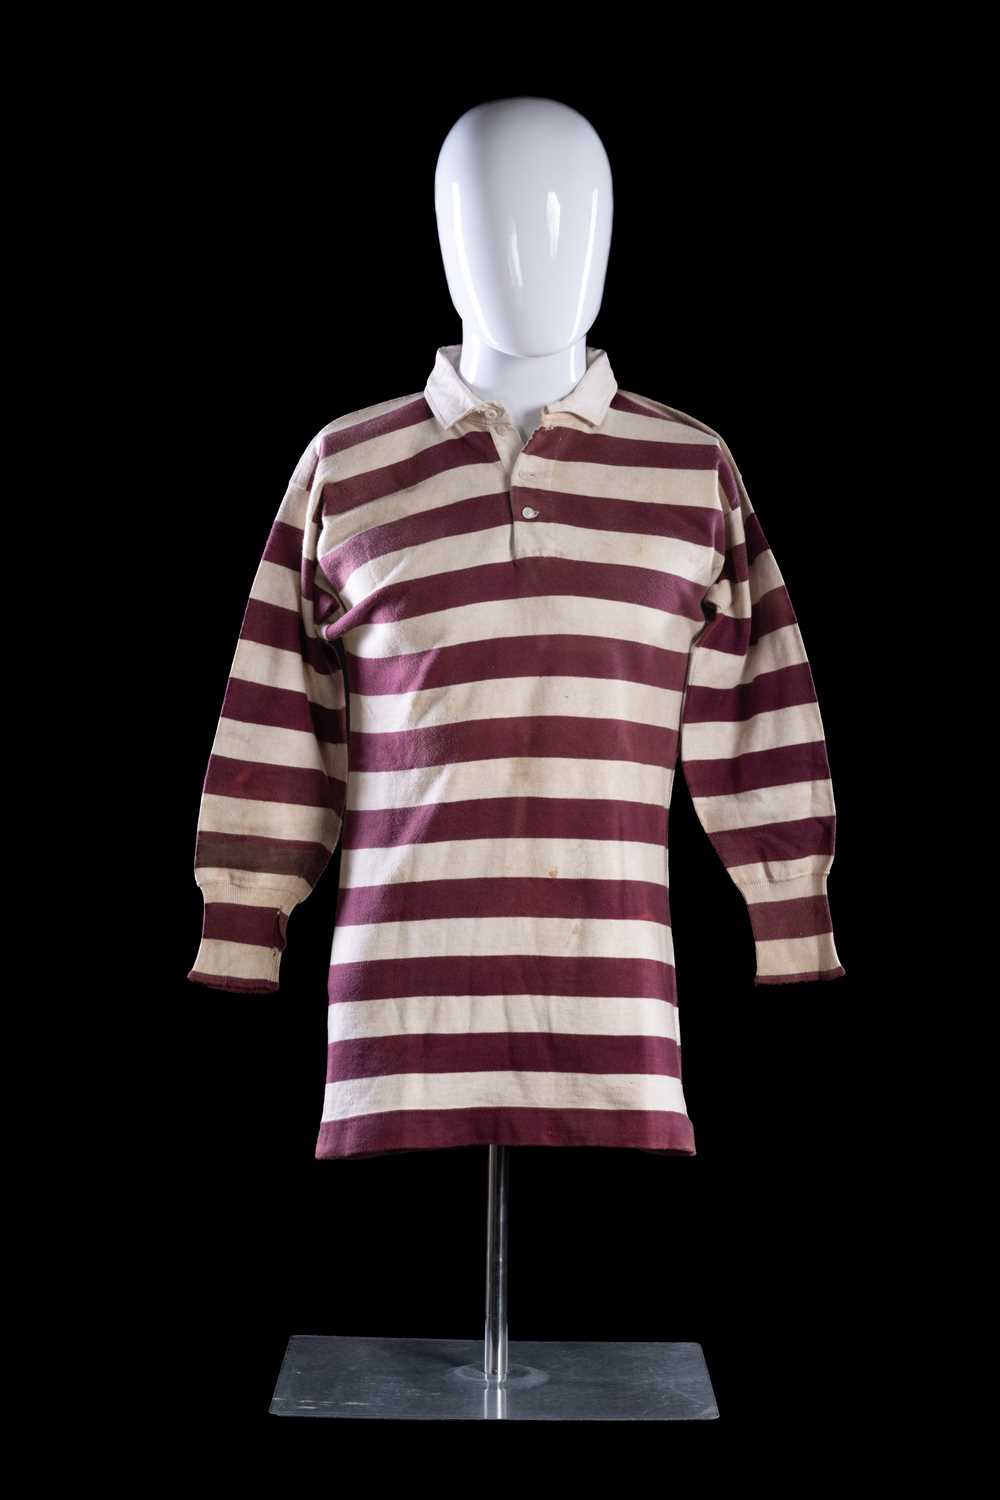 A CIRCA 1902 WALES RUGBY UNION TRIAL JERSEY MATCH-WORN BY CHARLES MEYRICK PRITCHARD (1882-1916)